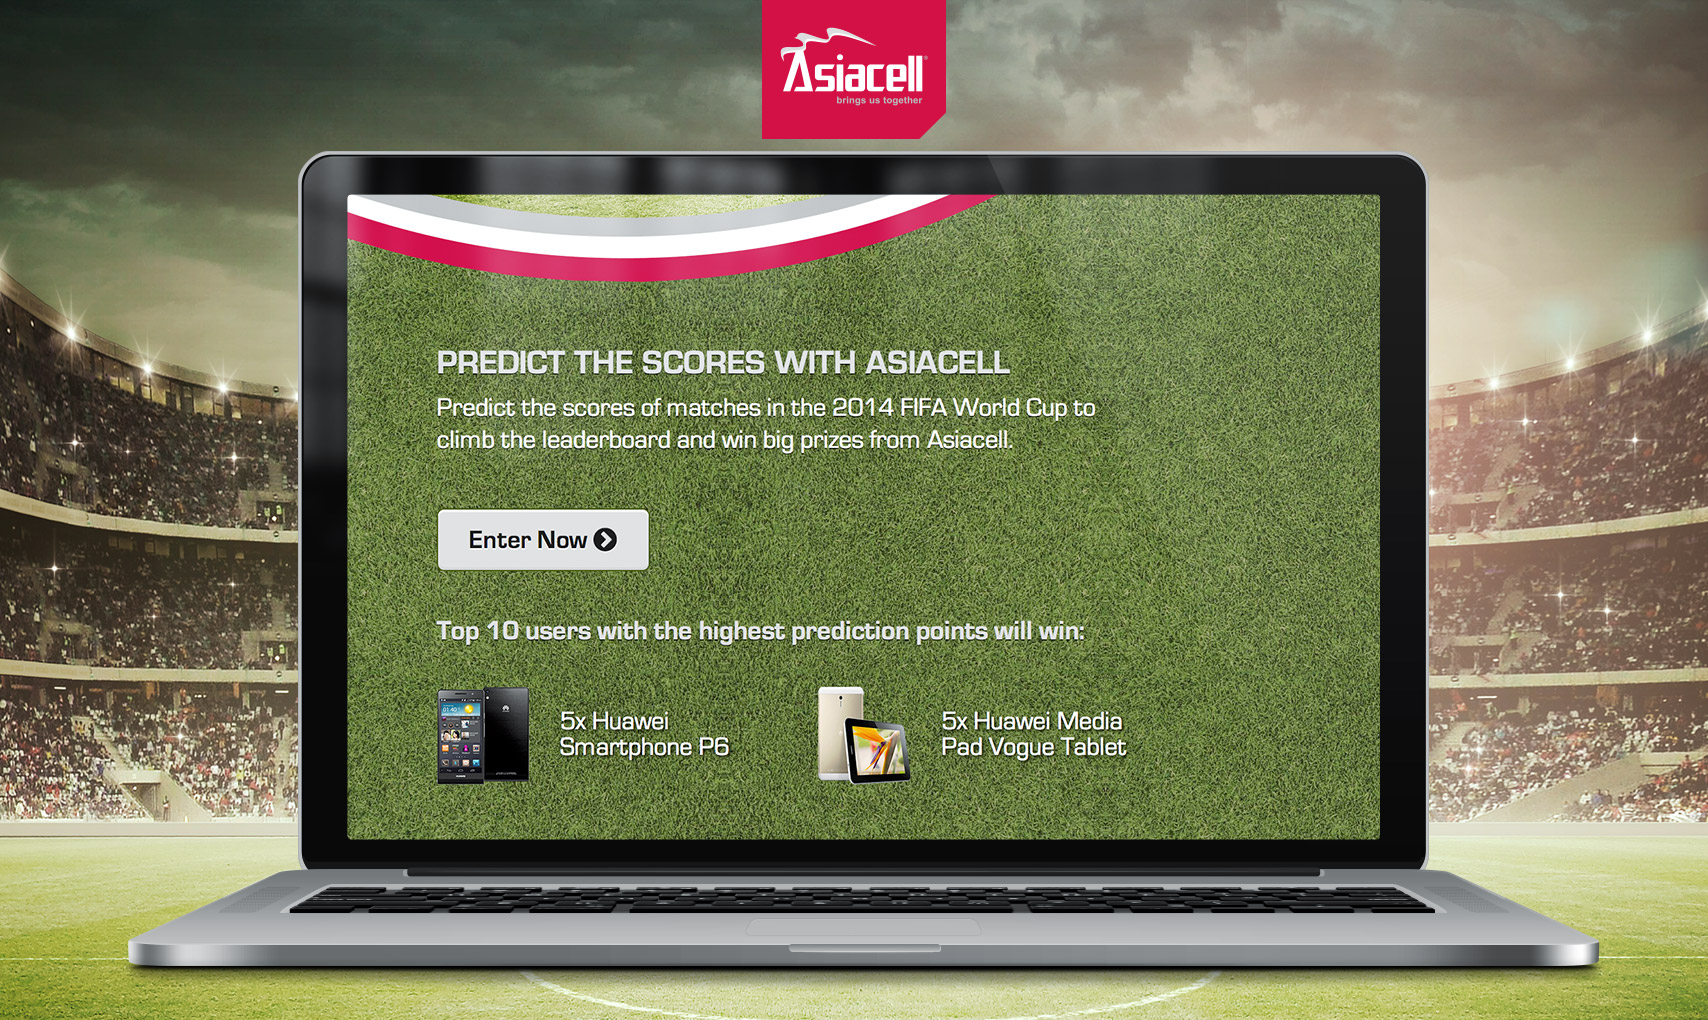 Asiacell FIFA World Cup 2014 Score Predictor Case Study Cygnis Media